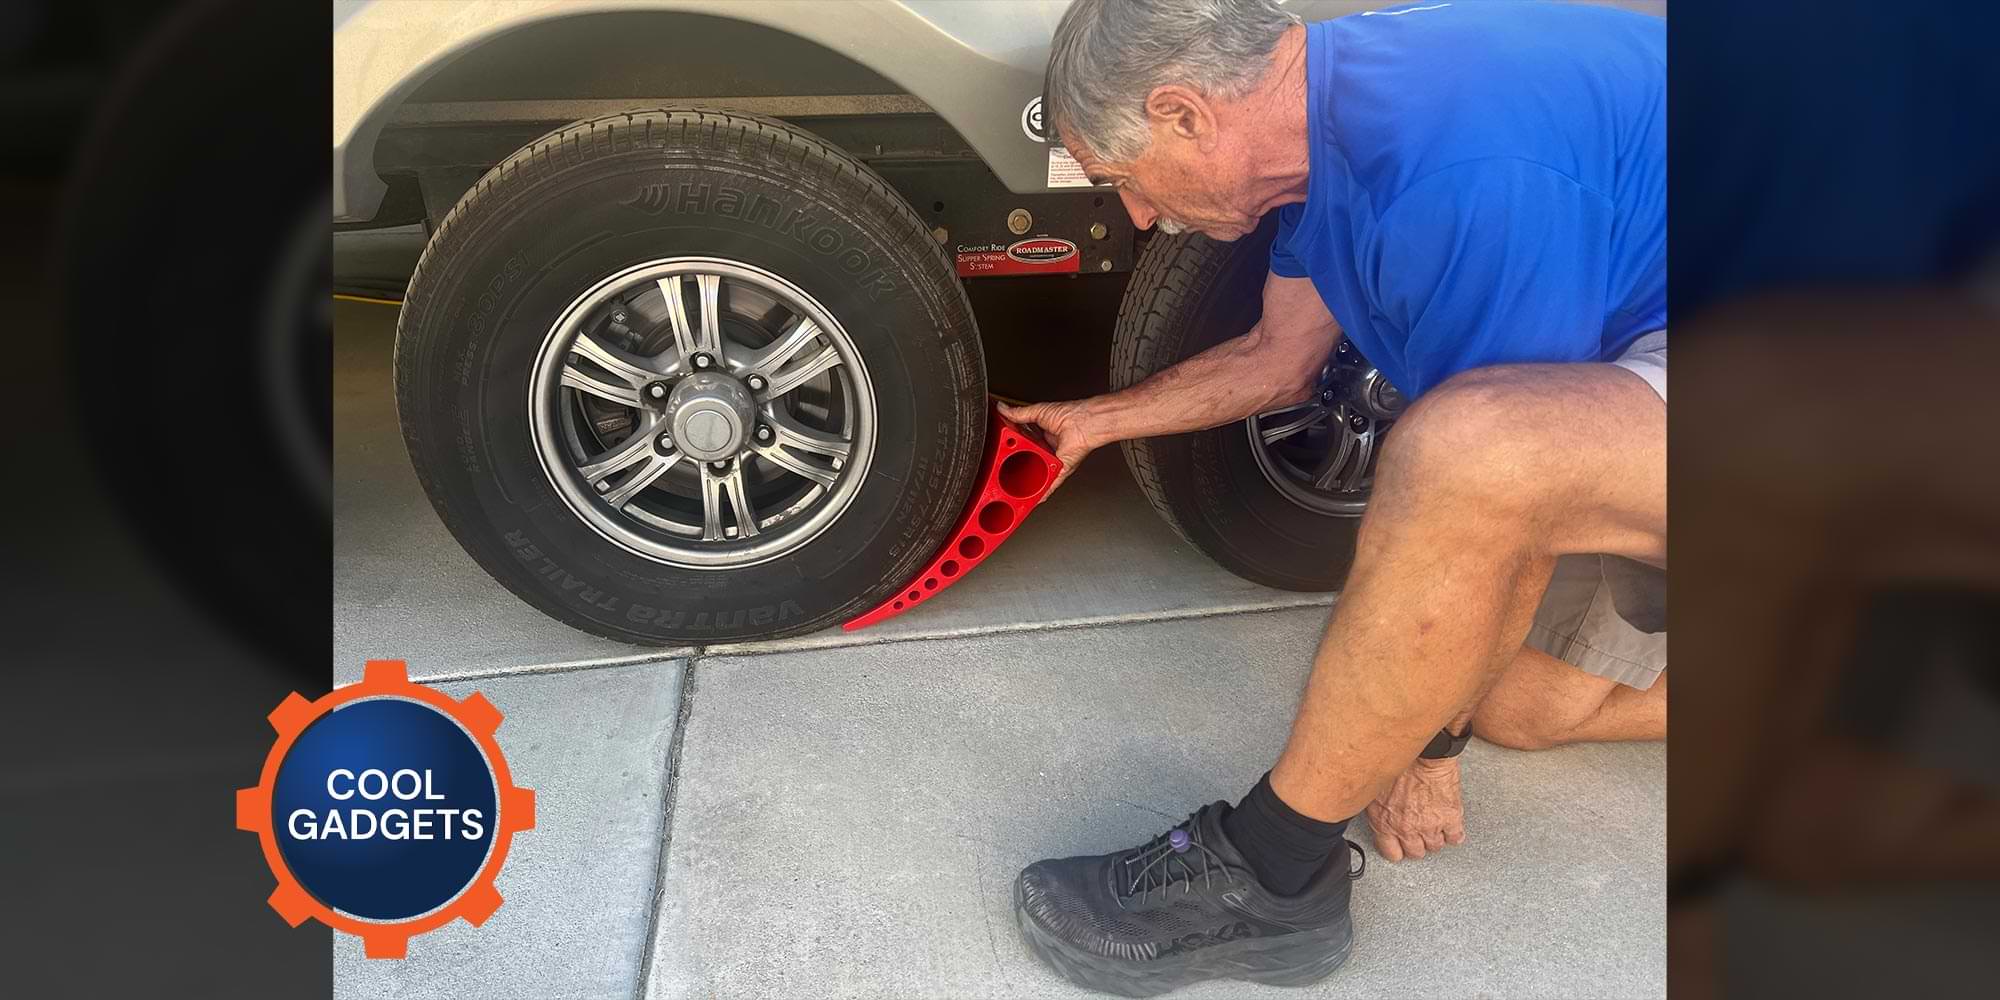 a man places a large red thorn shaped gadget beneath a tire on an RV